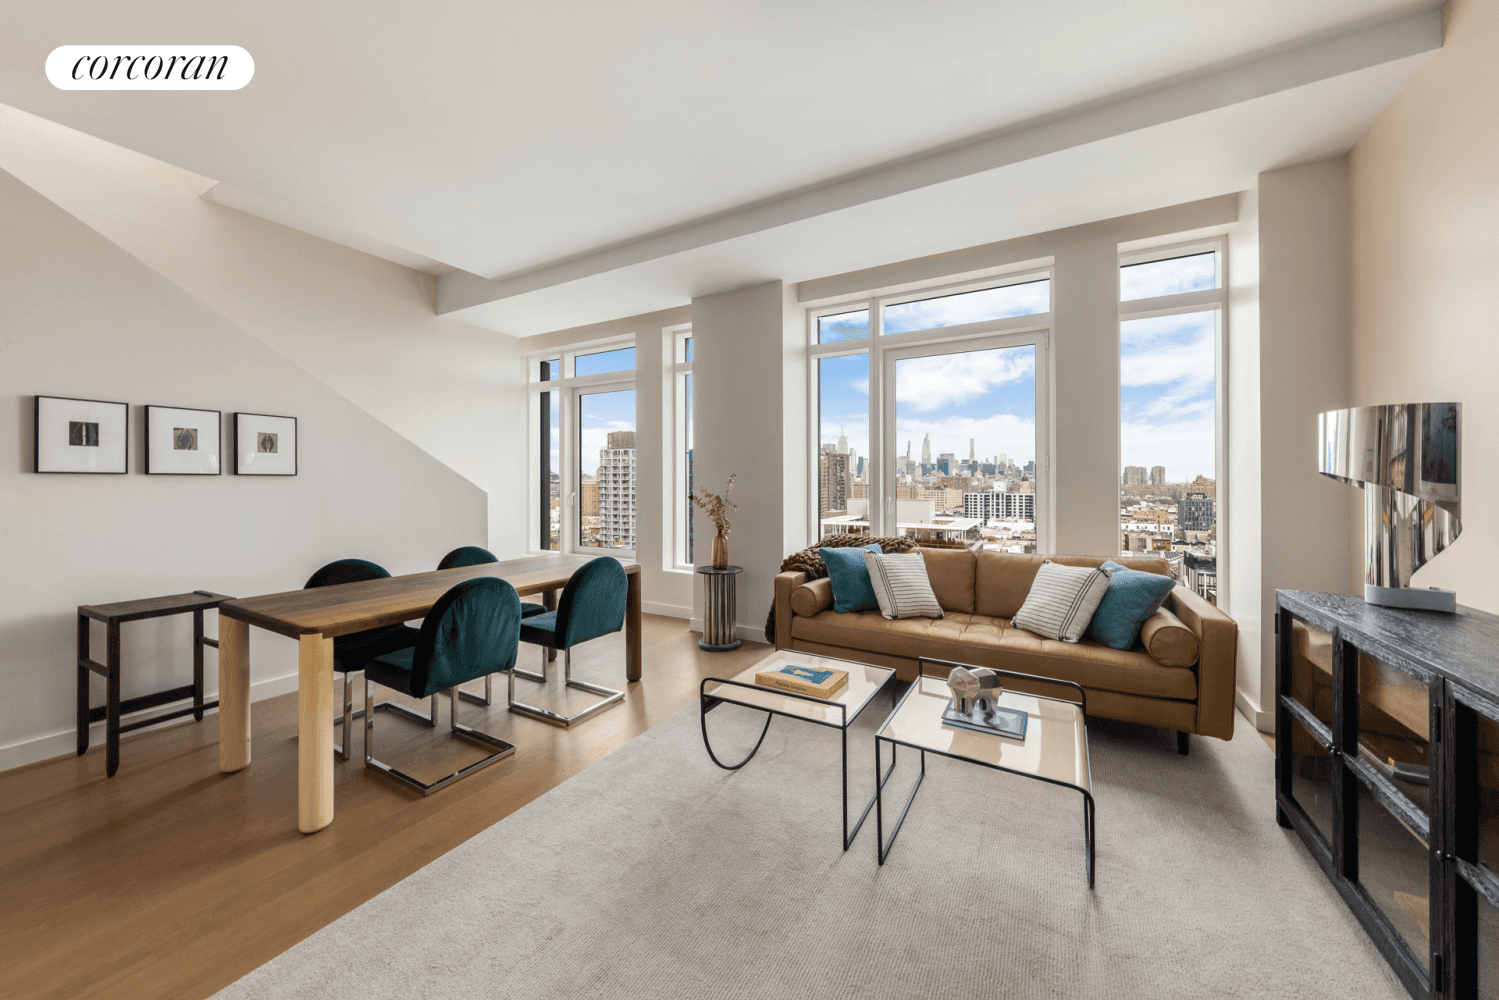 ULTIMATE 1BR PENTHOUSE WITH PRIVATE ROOF TERRACE AND SPECTACULAR VIEWS OF MIDTOWN ASK US ABOUT OUR PURCHASER INCENTIVES Sitting at the heart of this authentic and historic New York neighborhood ...